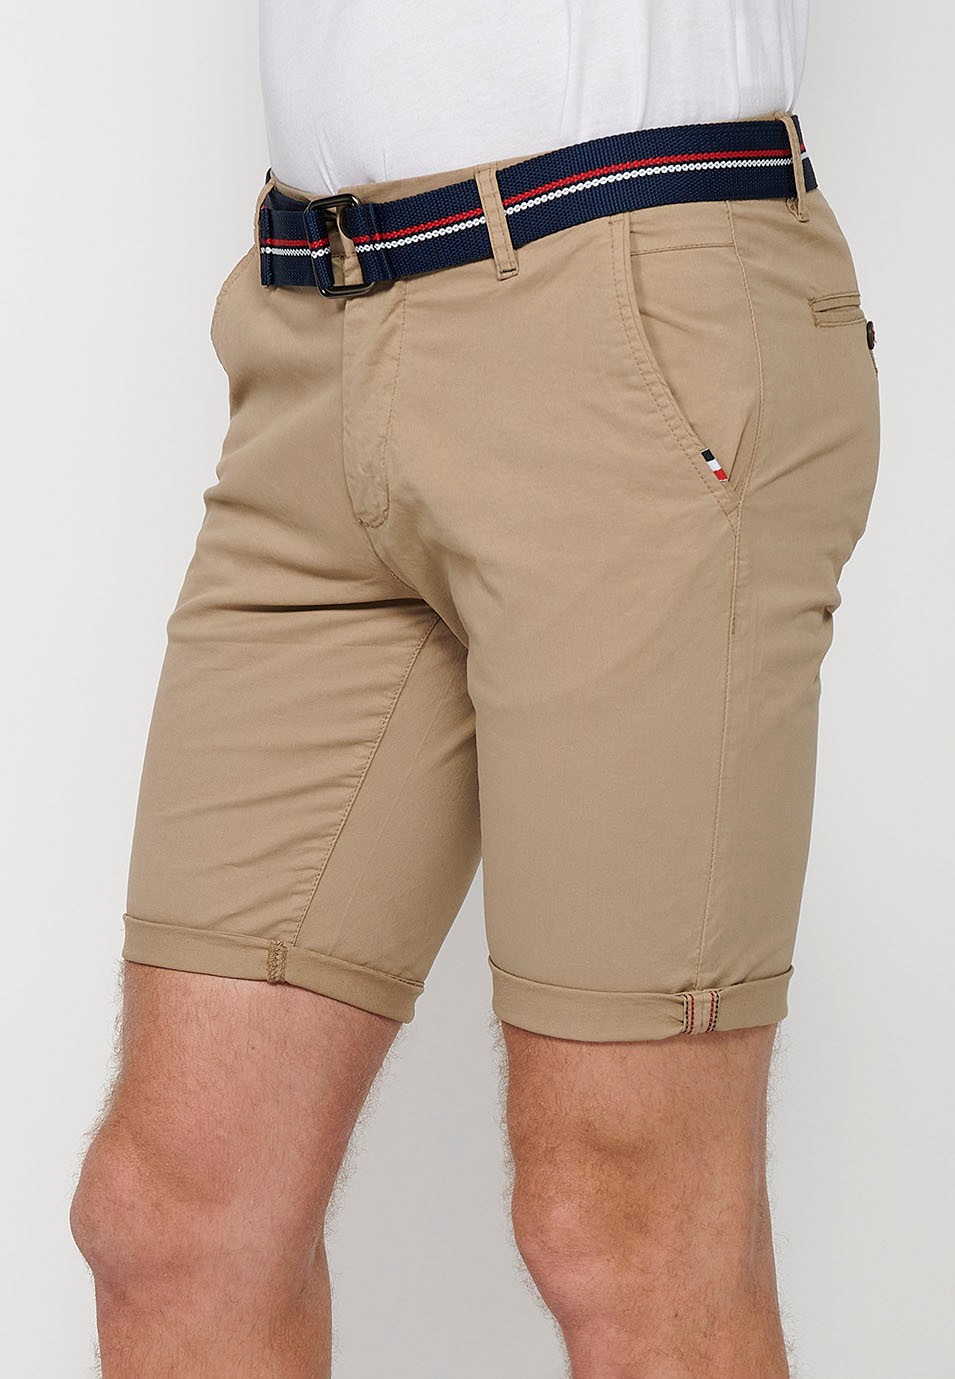 Shorts with a turn-up finish with front closure with zipper and button and belt in Beige Color for Men 4